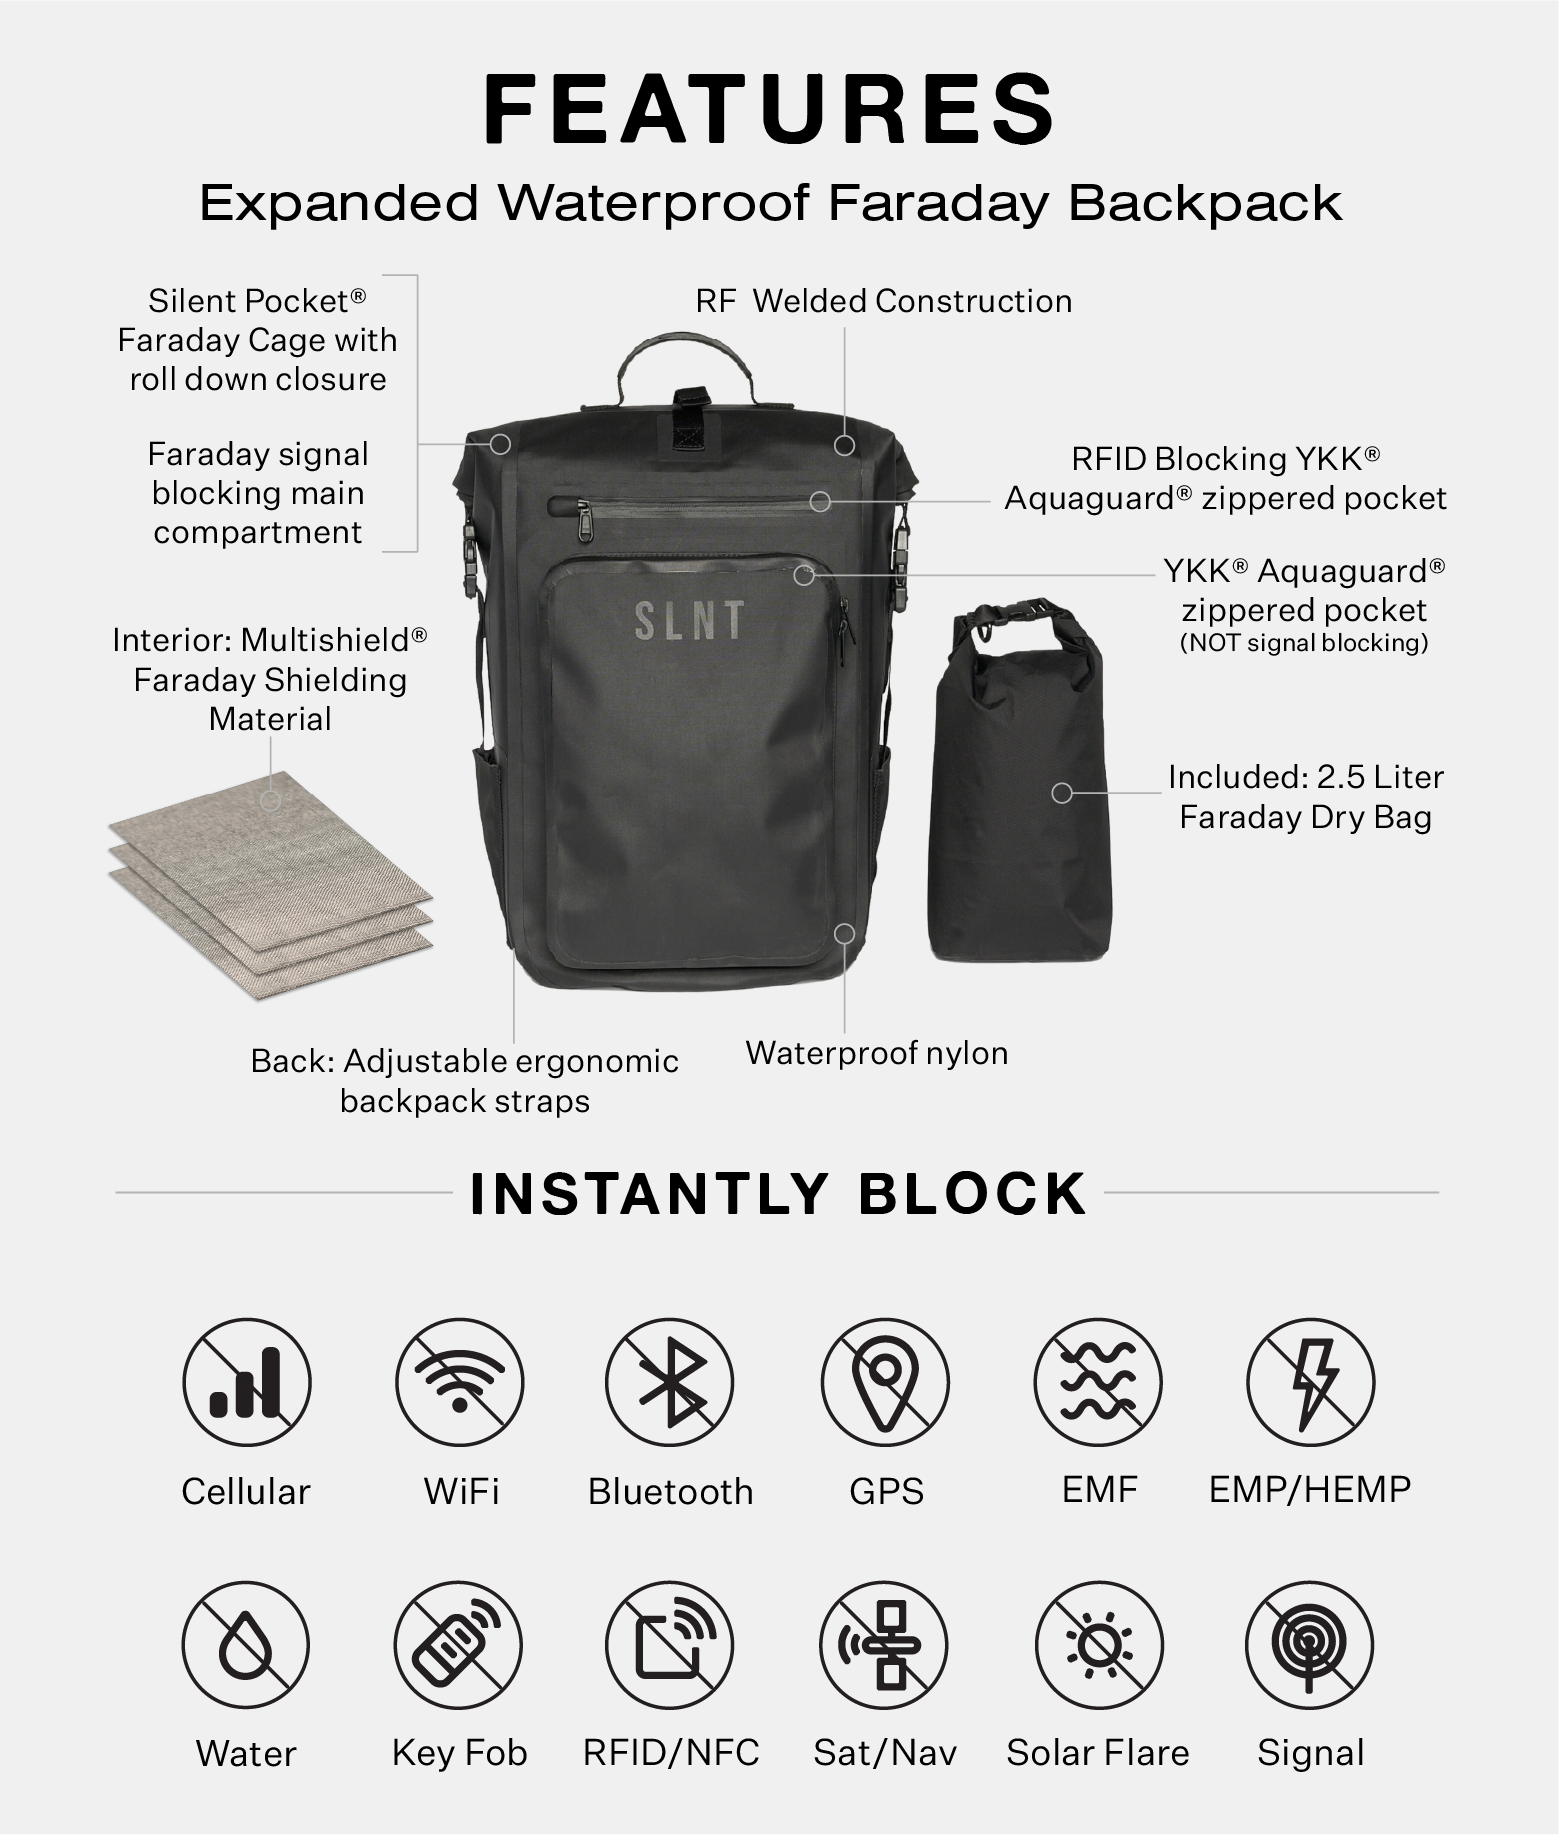 Faraday backpack details